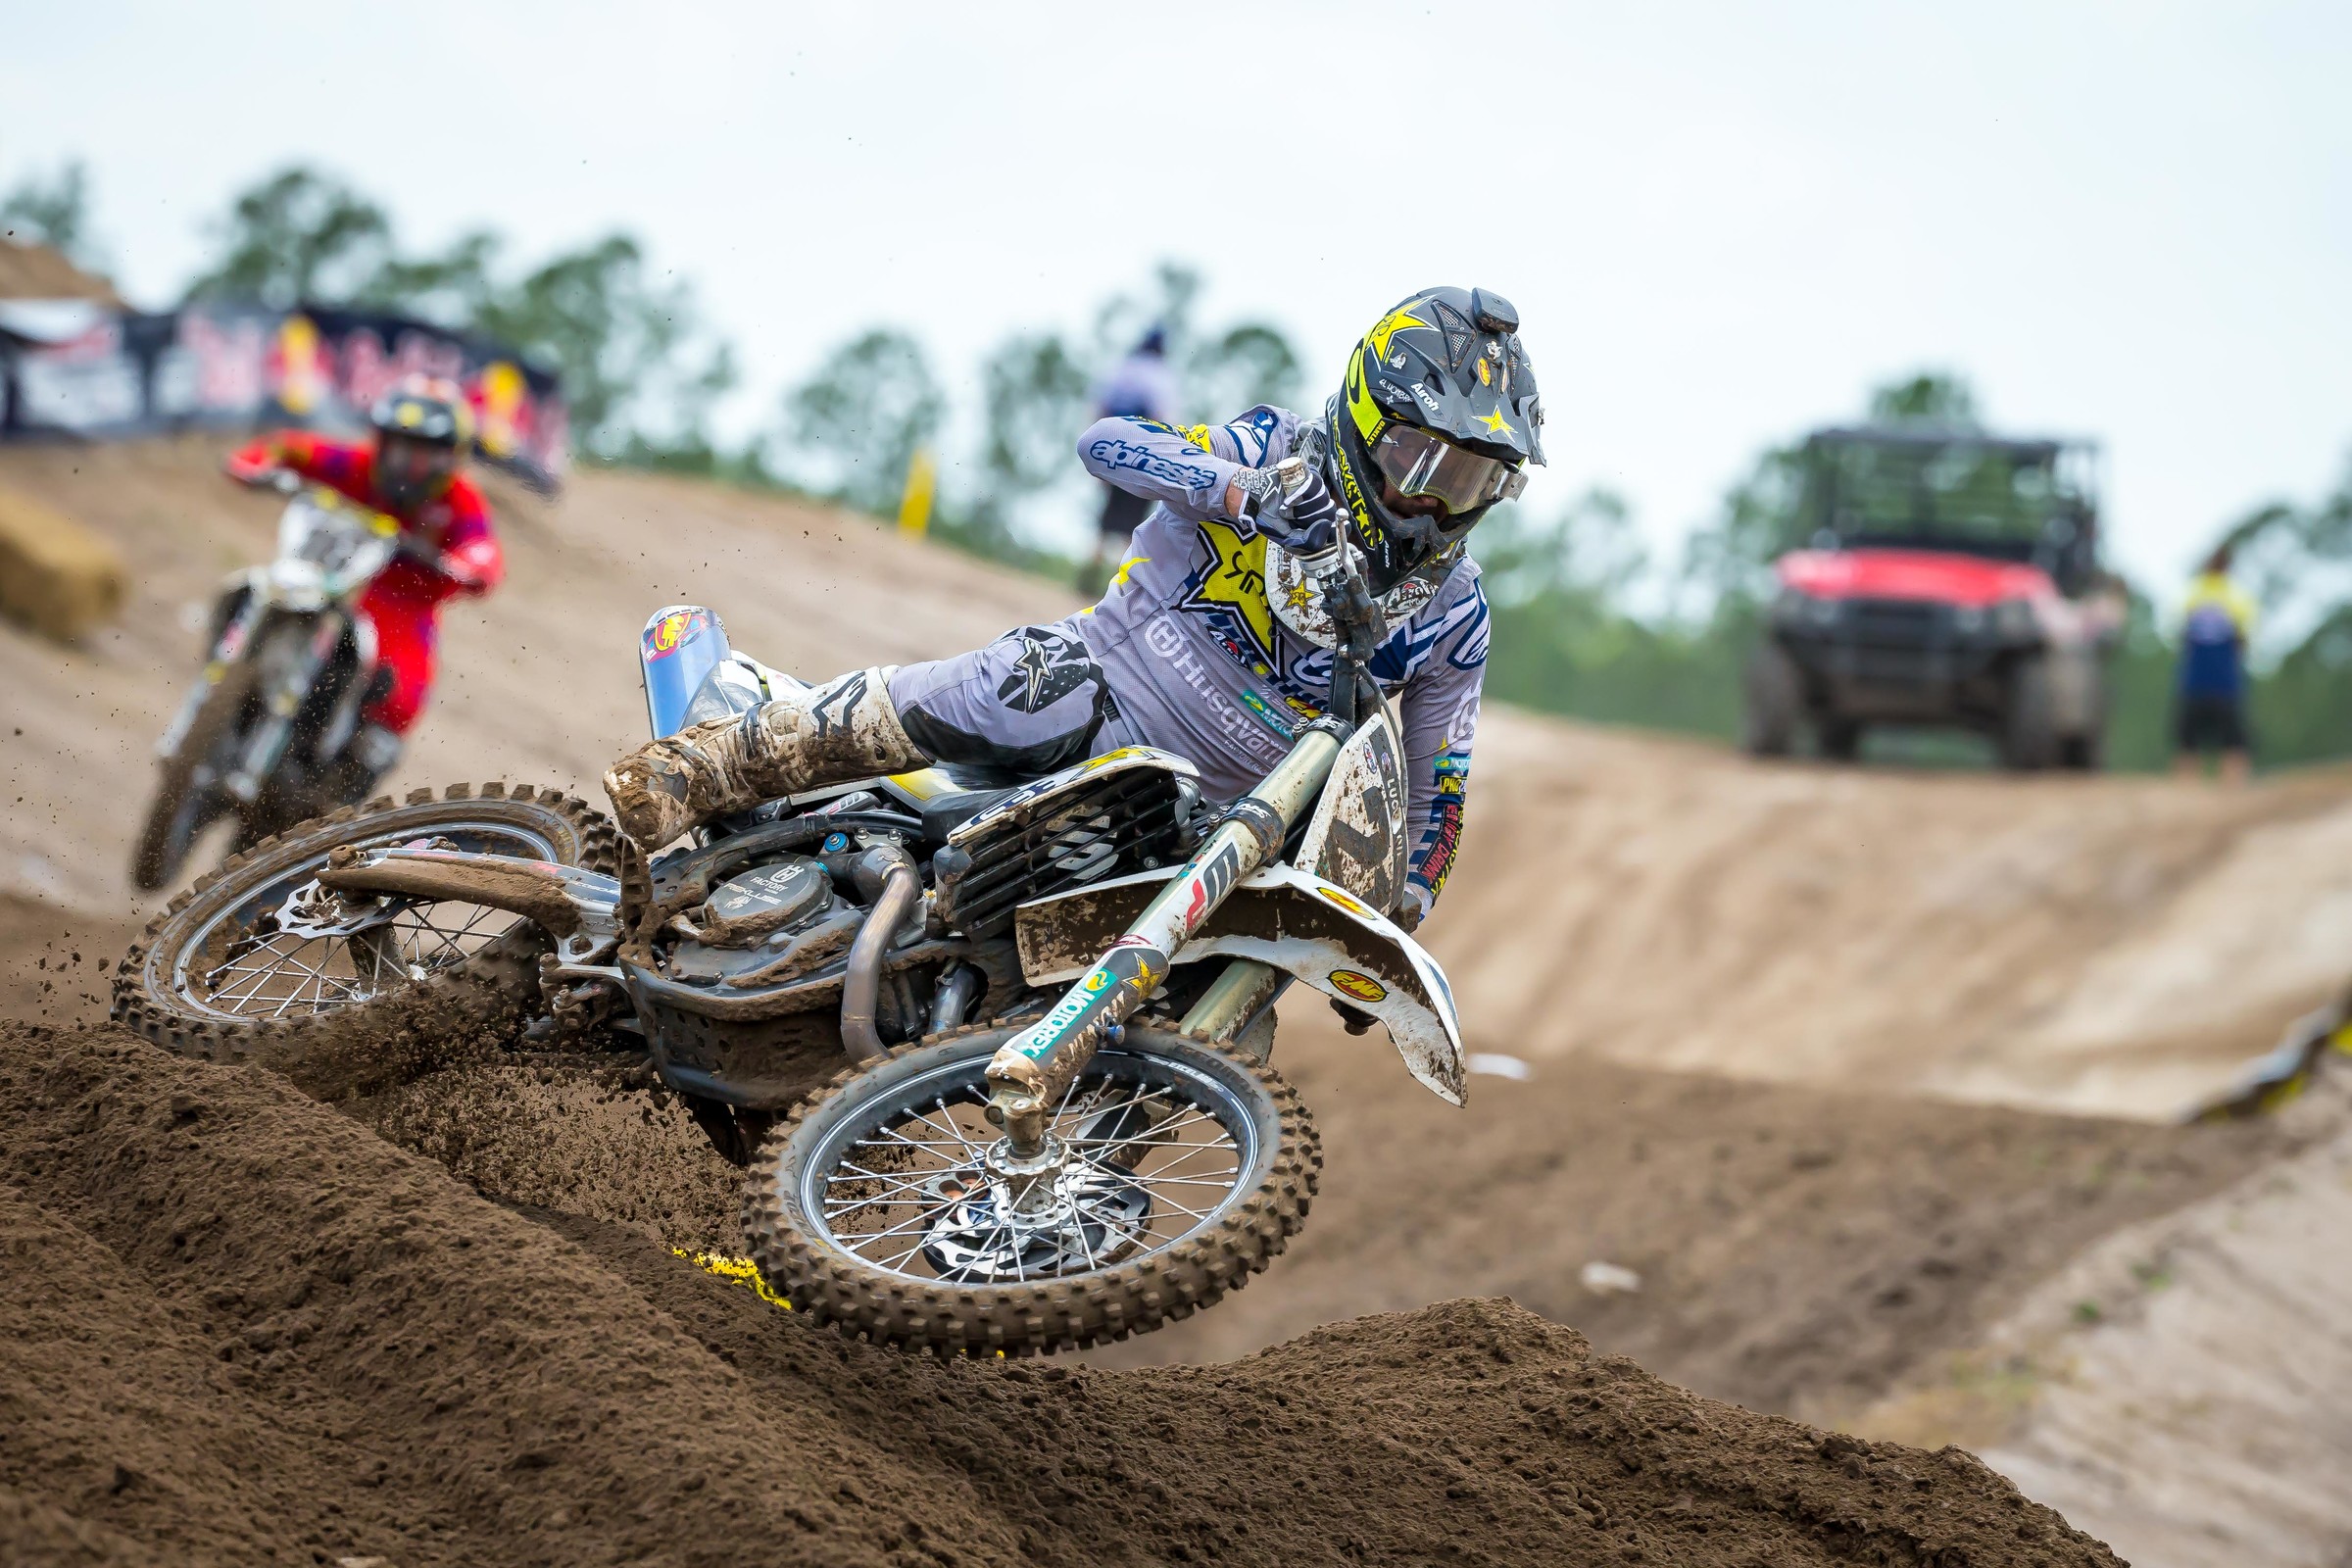 odds of becoming a professional motocross racer